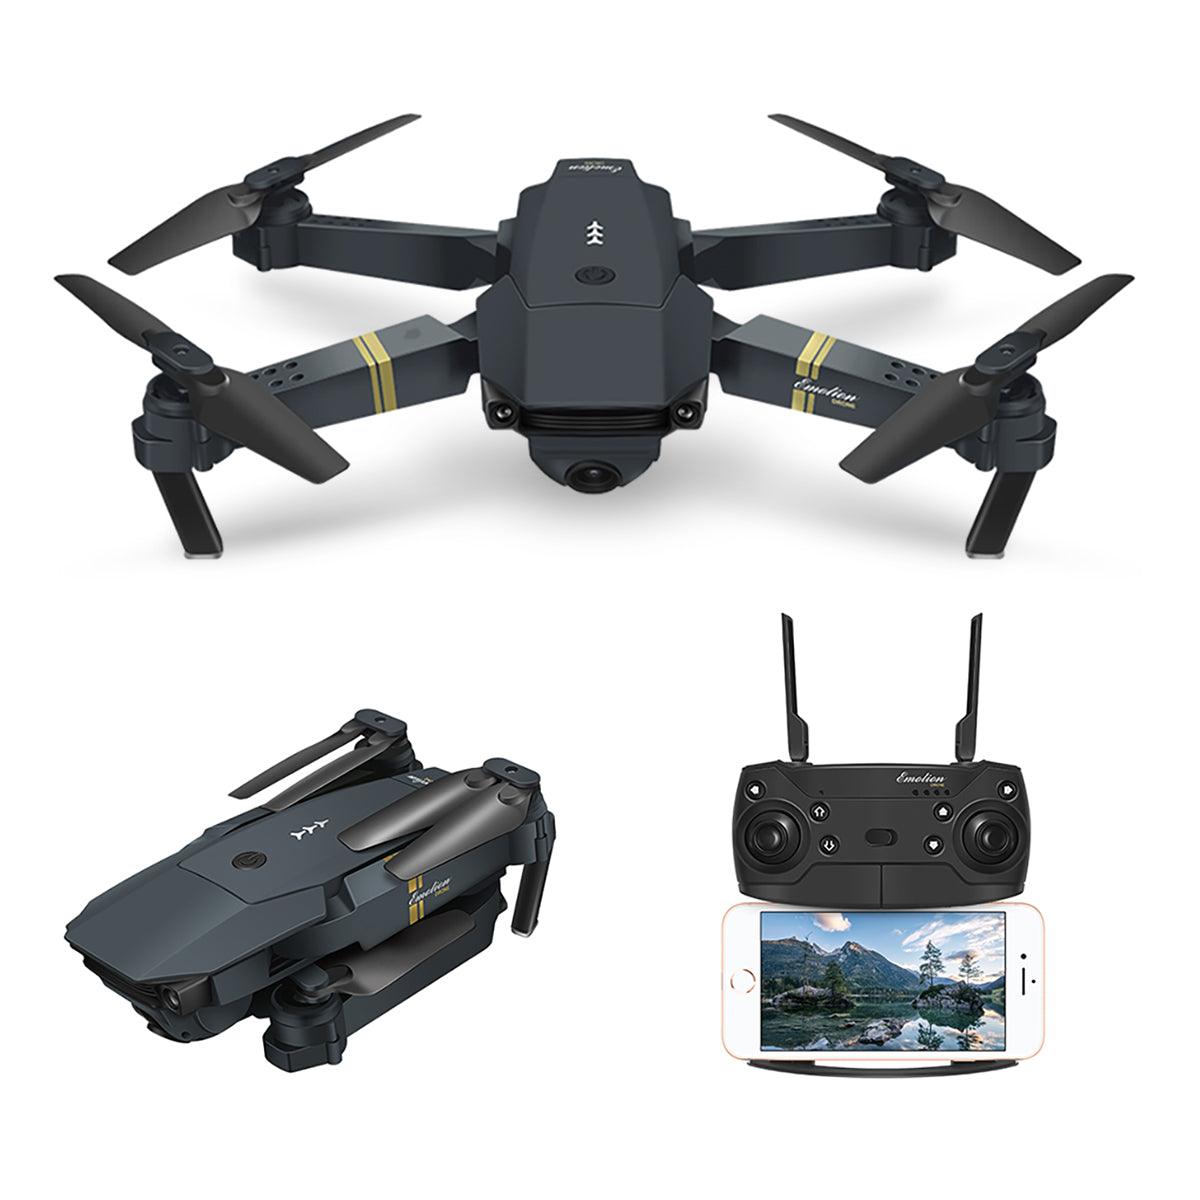 daar ben ik het mee eens Goedkeuring opvolger EACHINE E58 Drone With Dual Camera 2MP Wide Angle WIFI FPV Foldable RC Drone  Quadcopter